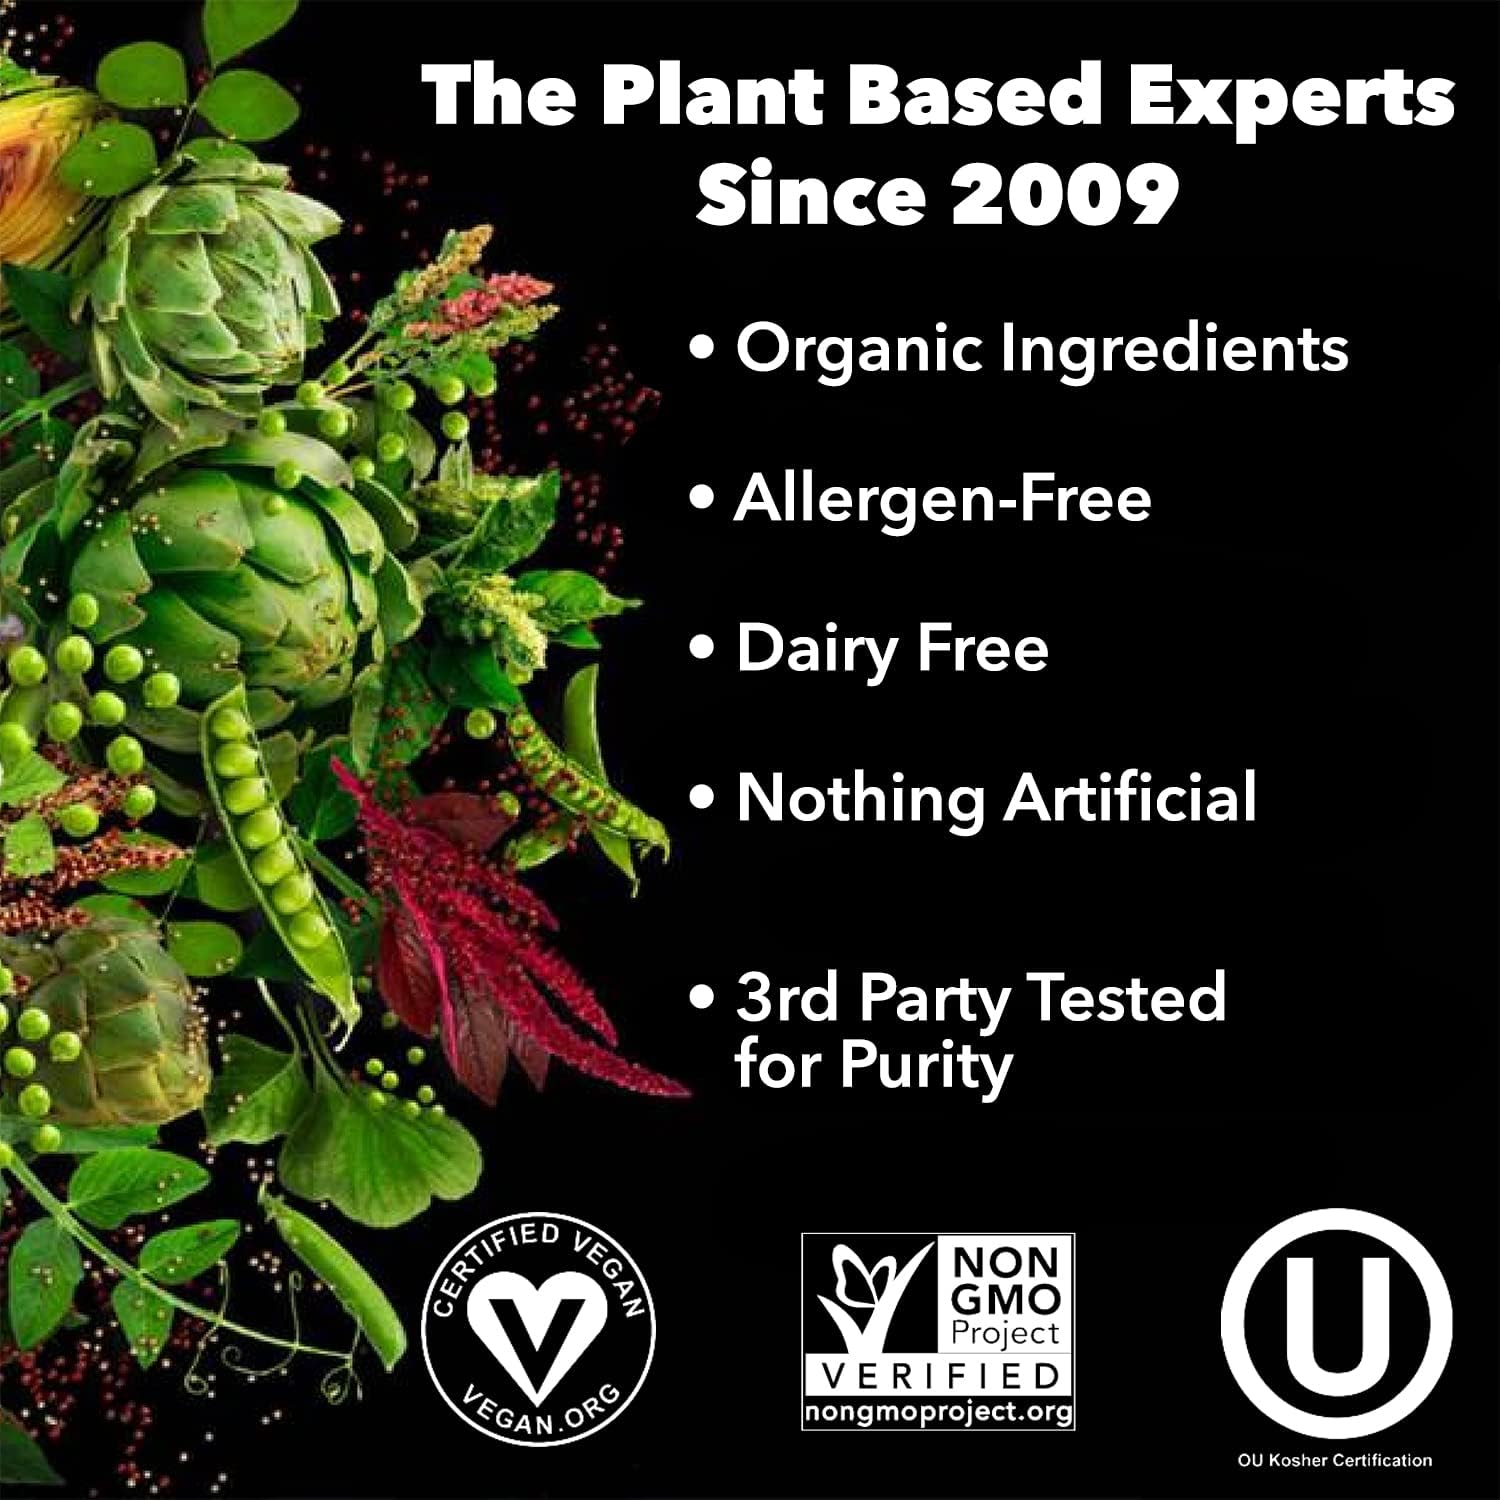 PlantFusion Complete Vegan Protein Powder - Plant Based With BCAAs, Di